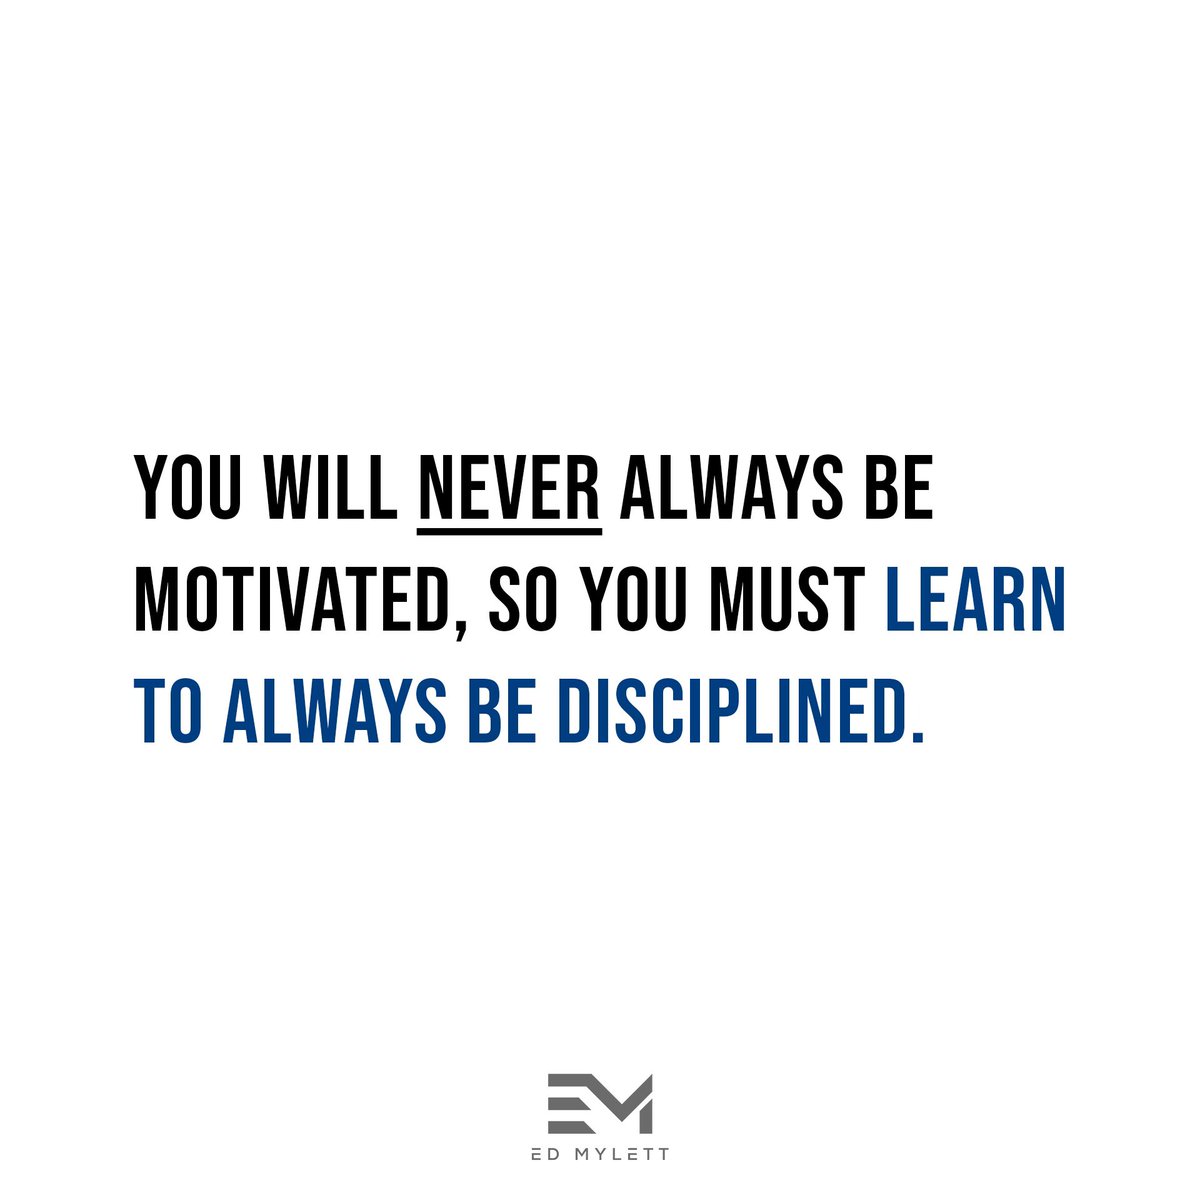 Discipline is critical because it allows you to… See the BIGGER PICTURE. Develop the right skills and talents. Focus on the PROCESS, not the outcome. Be insanely CONSISTENT. And minimize impacts on your output when you’re not motivated.